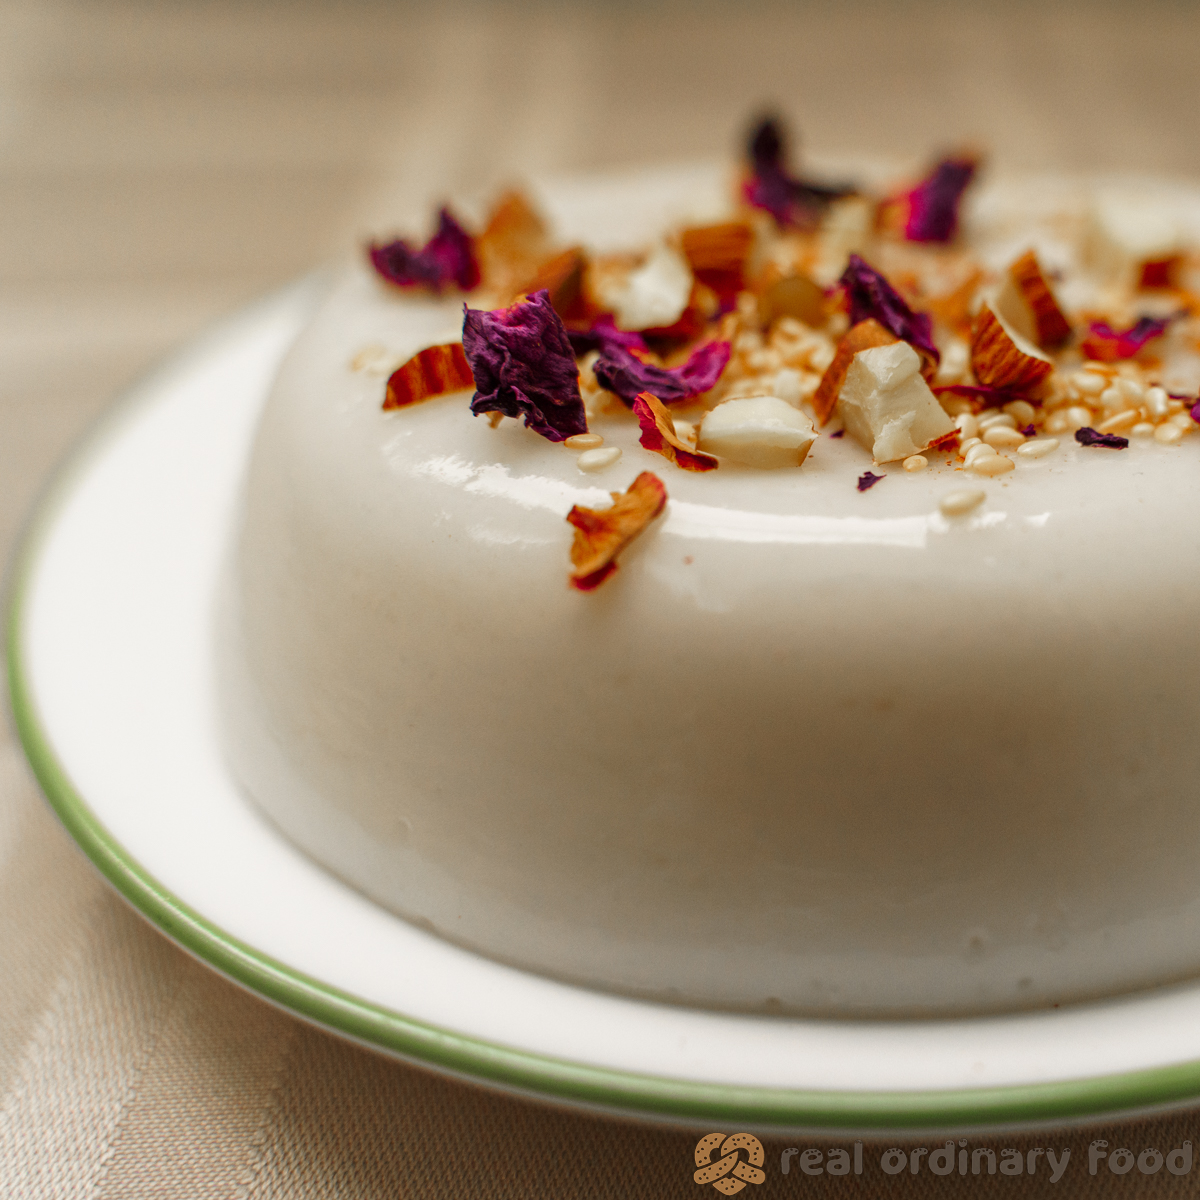 muhallebi pudding sprinkled with rose petals and almonds